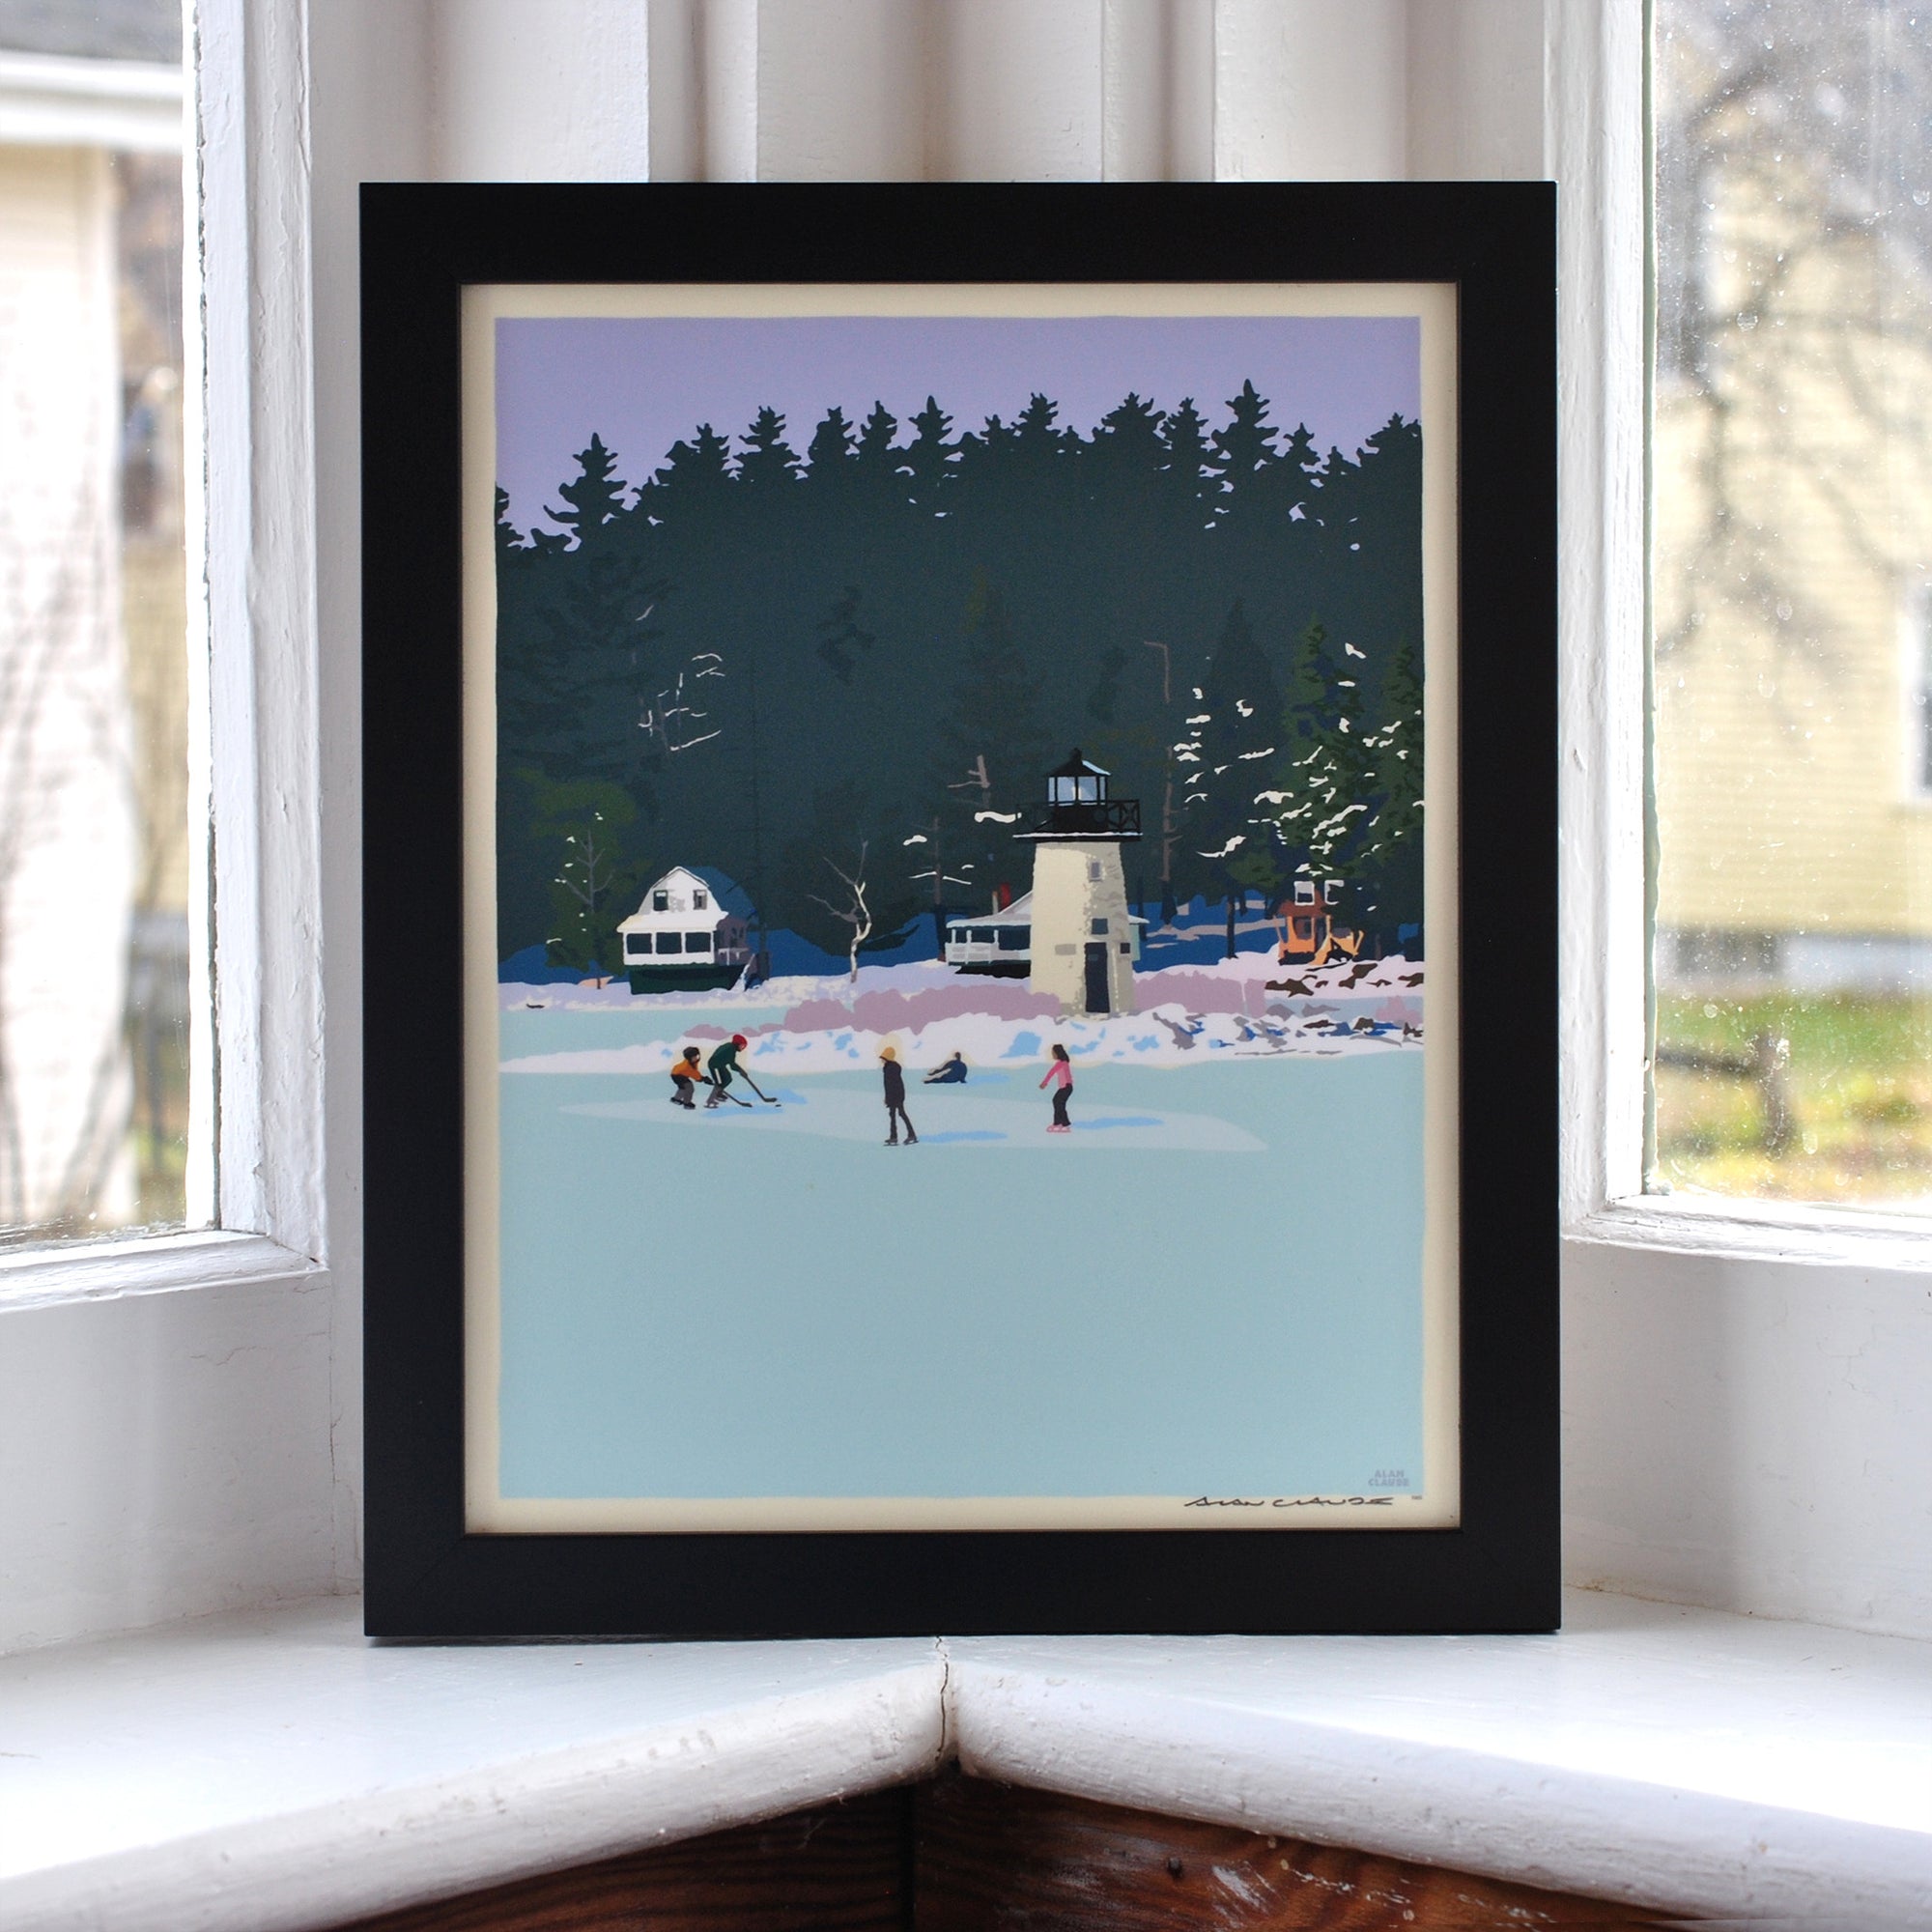 Ice Skating At Ladies Delight Art Print 8" x 10" Framed Wall Poster By Alan Claude - Maine